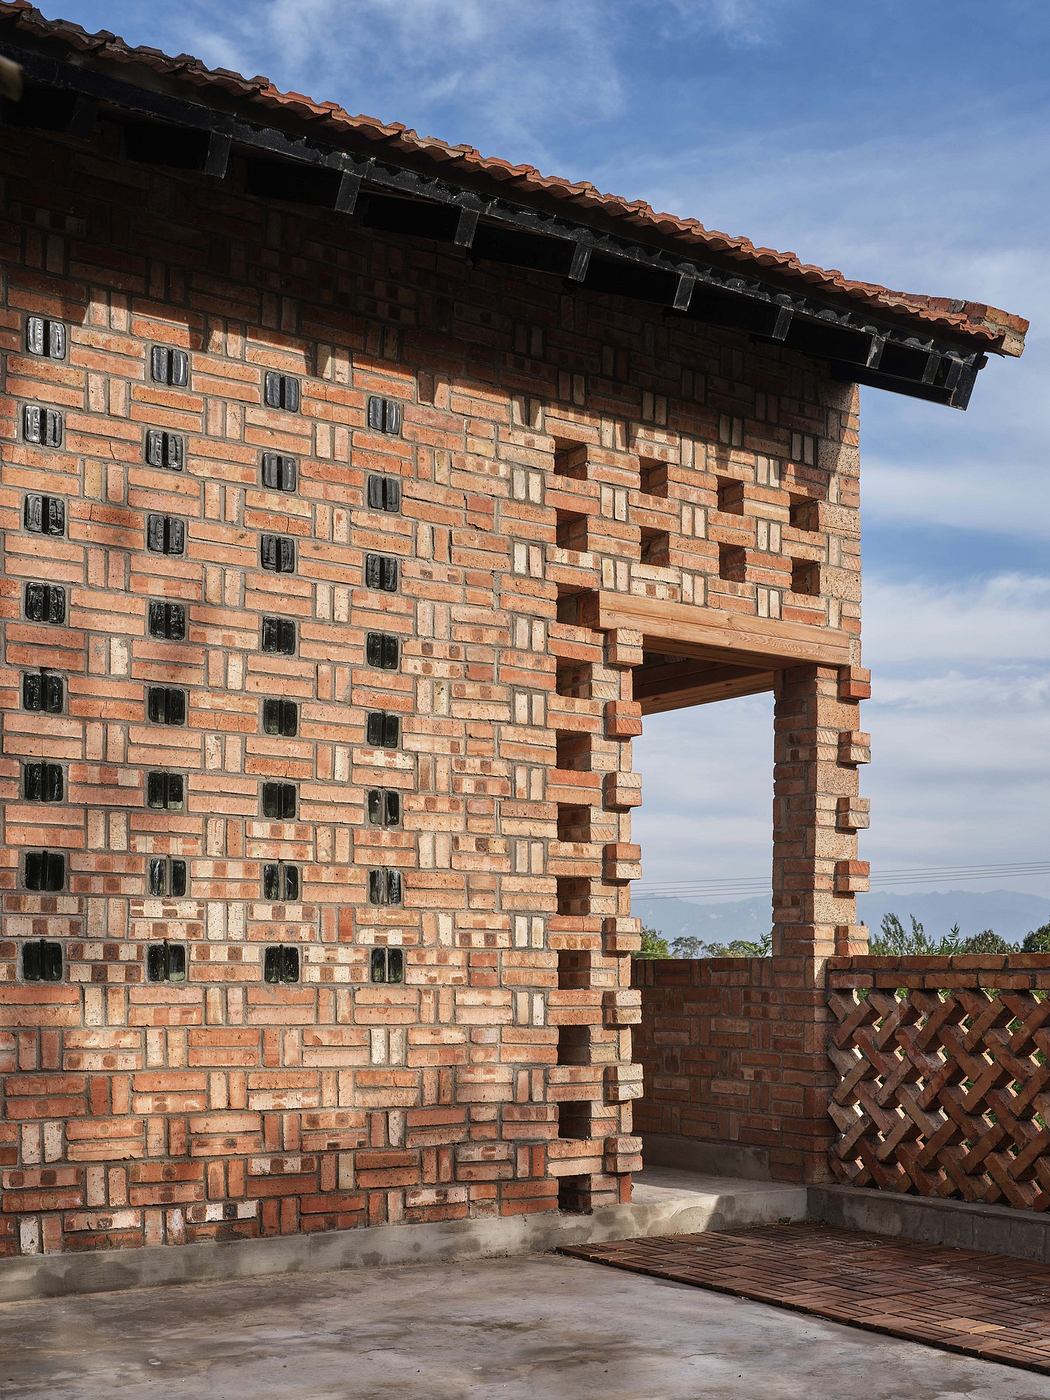 Brick building with unique geometric patterns and an open window.